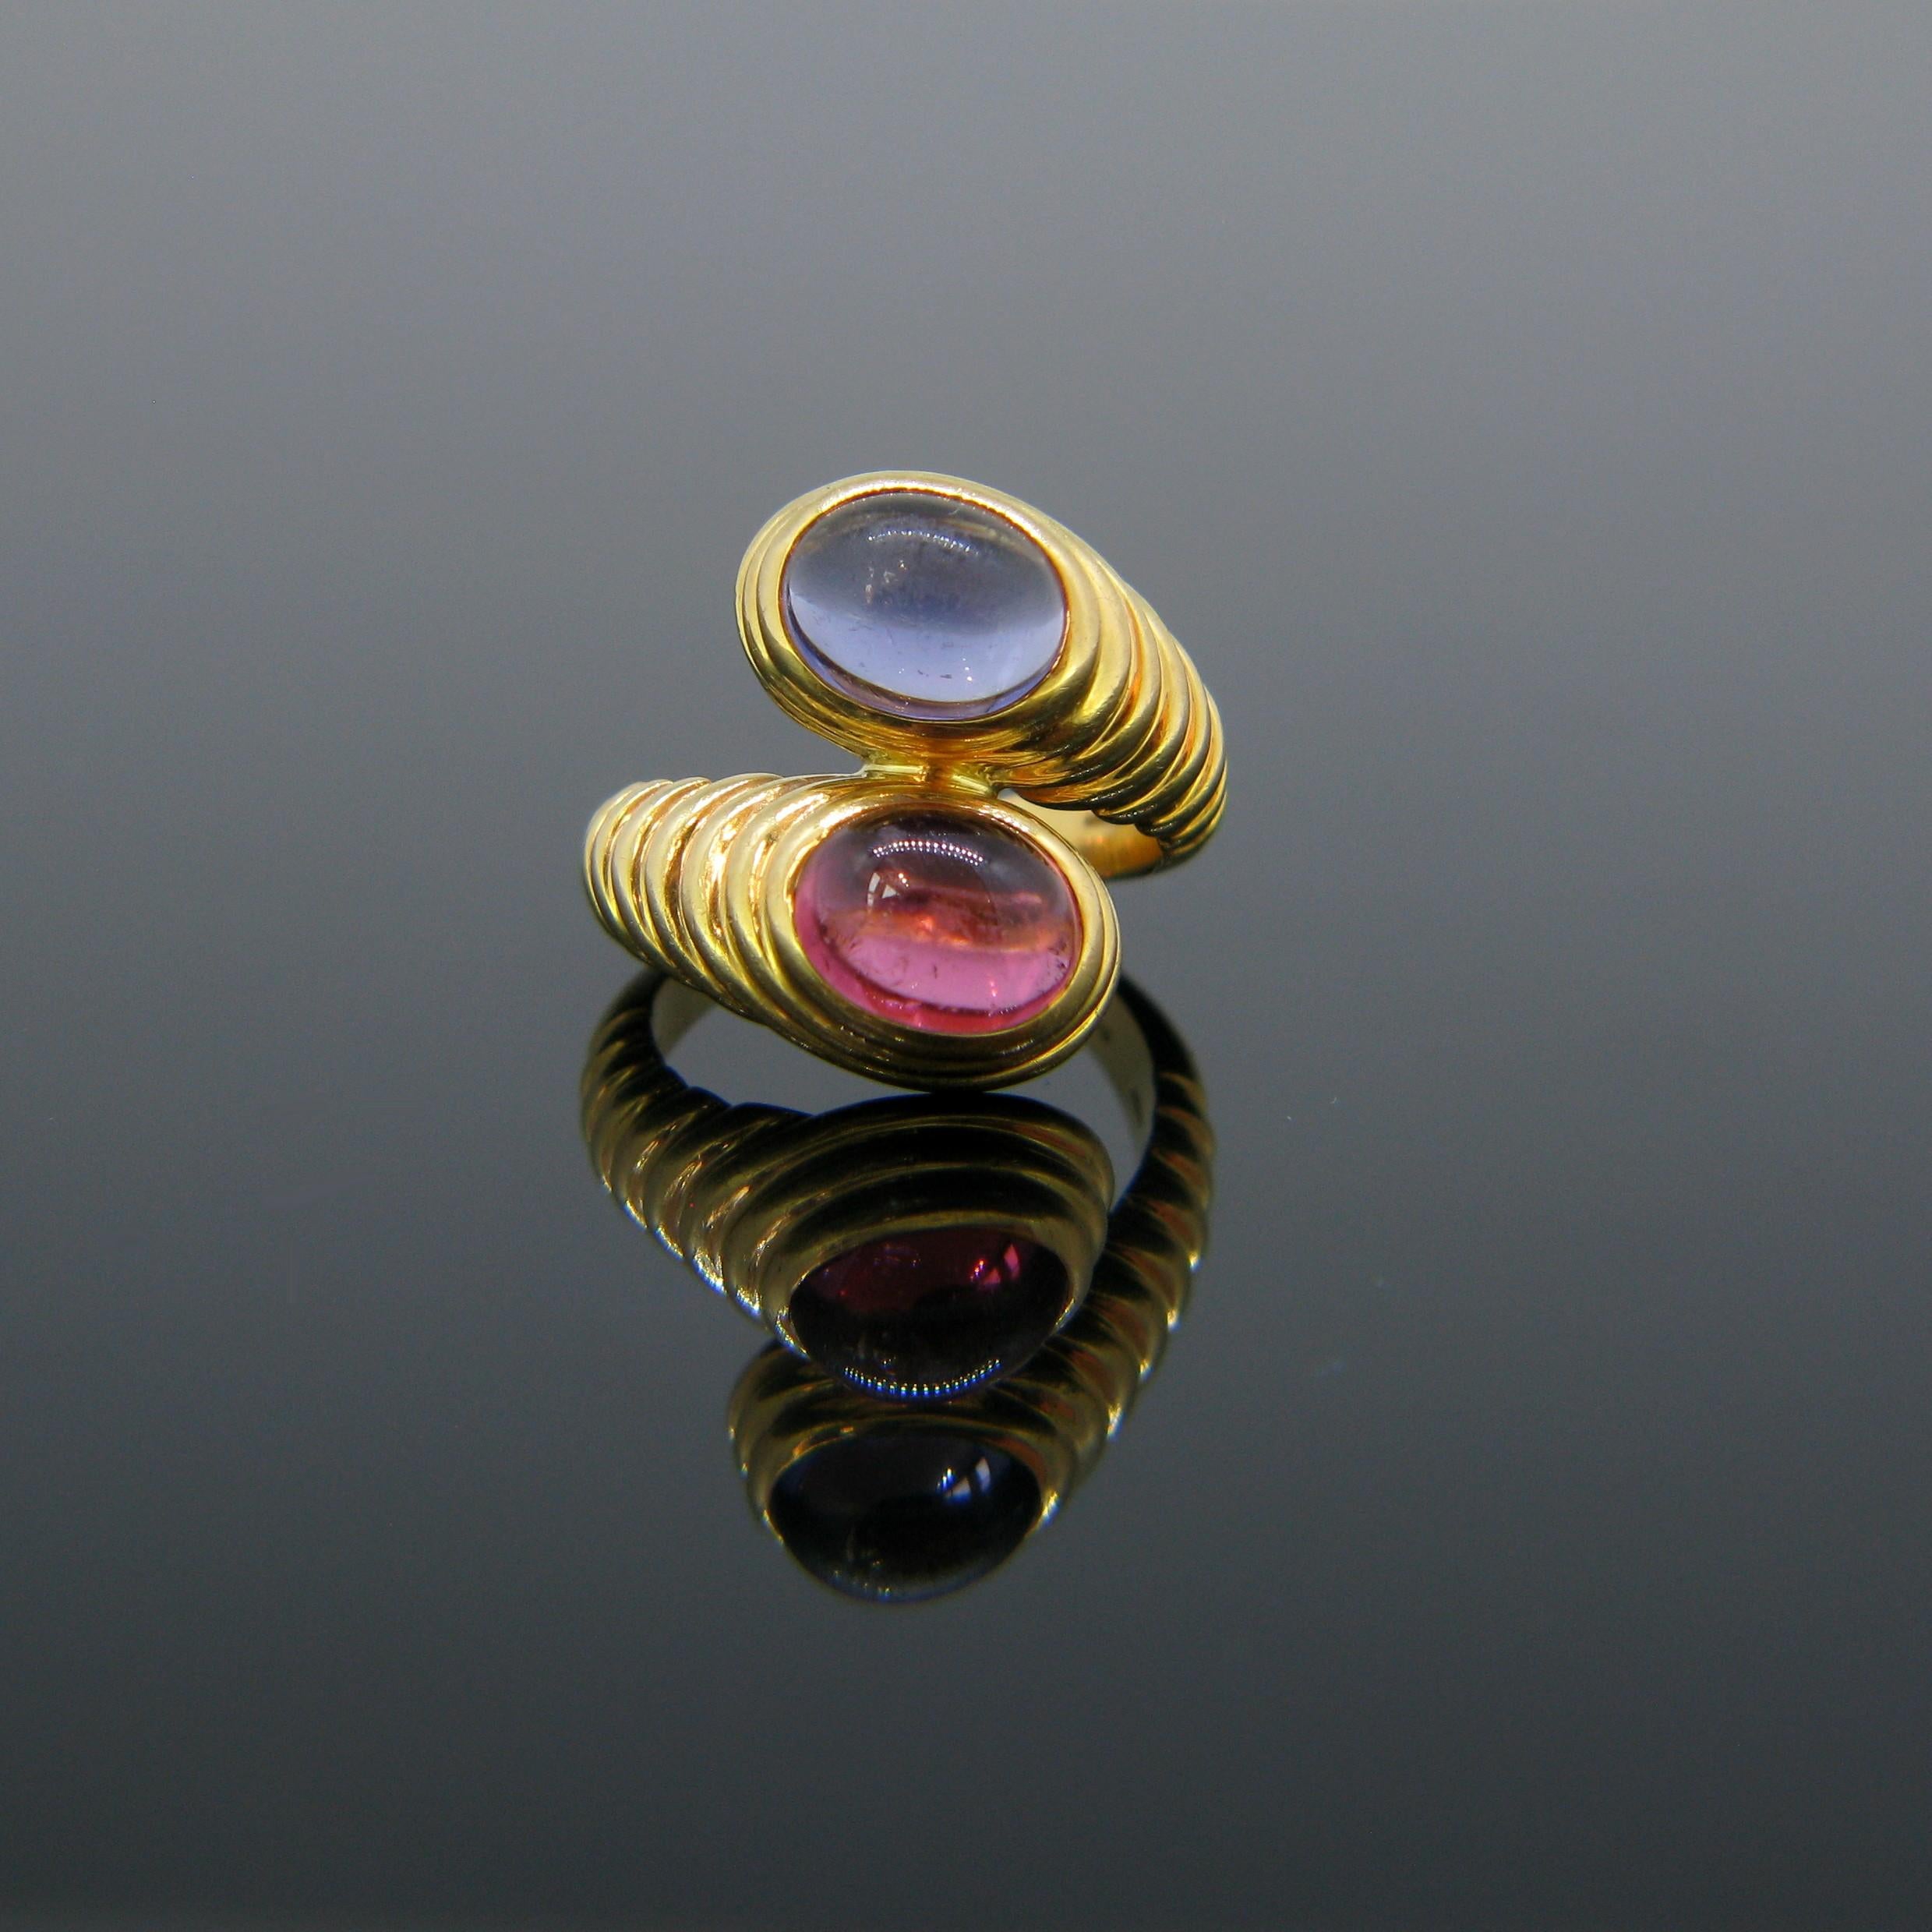 This opulent ring is fully made in 18kt yellow gold. It is set with two cabochon cut stones: an iolite and a pink tourmaline. They are arranged in a bypass/crossover design. The band is textured with round ridges. It is signed Bulgari inside the